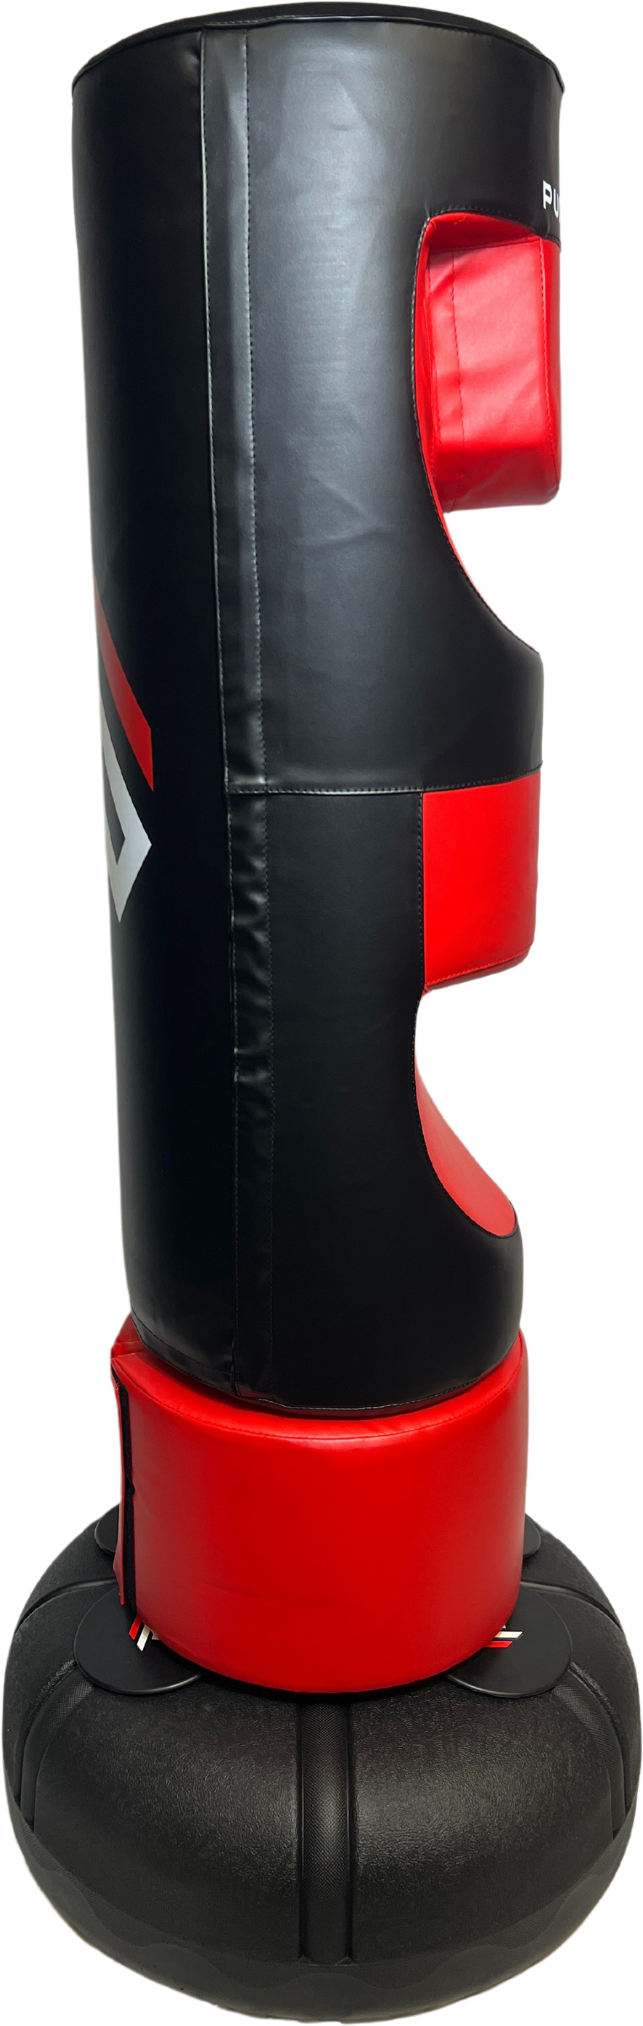 The NEW Freestanding 2.0  "Flow" Punching Bag